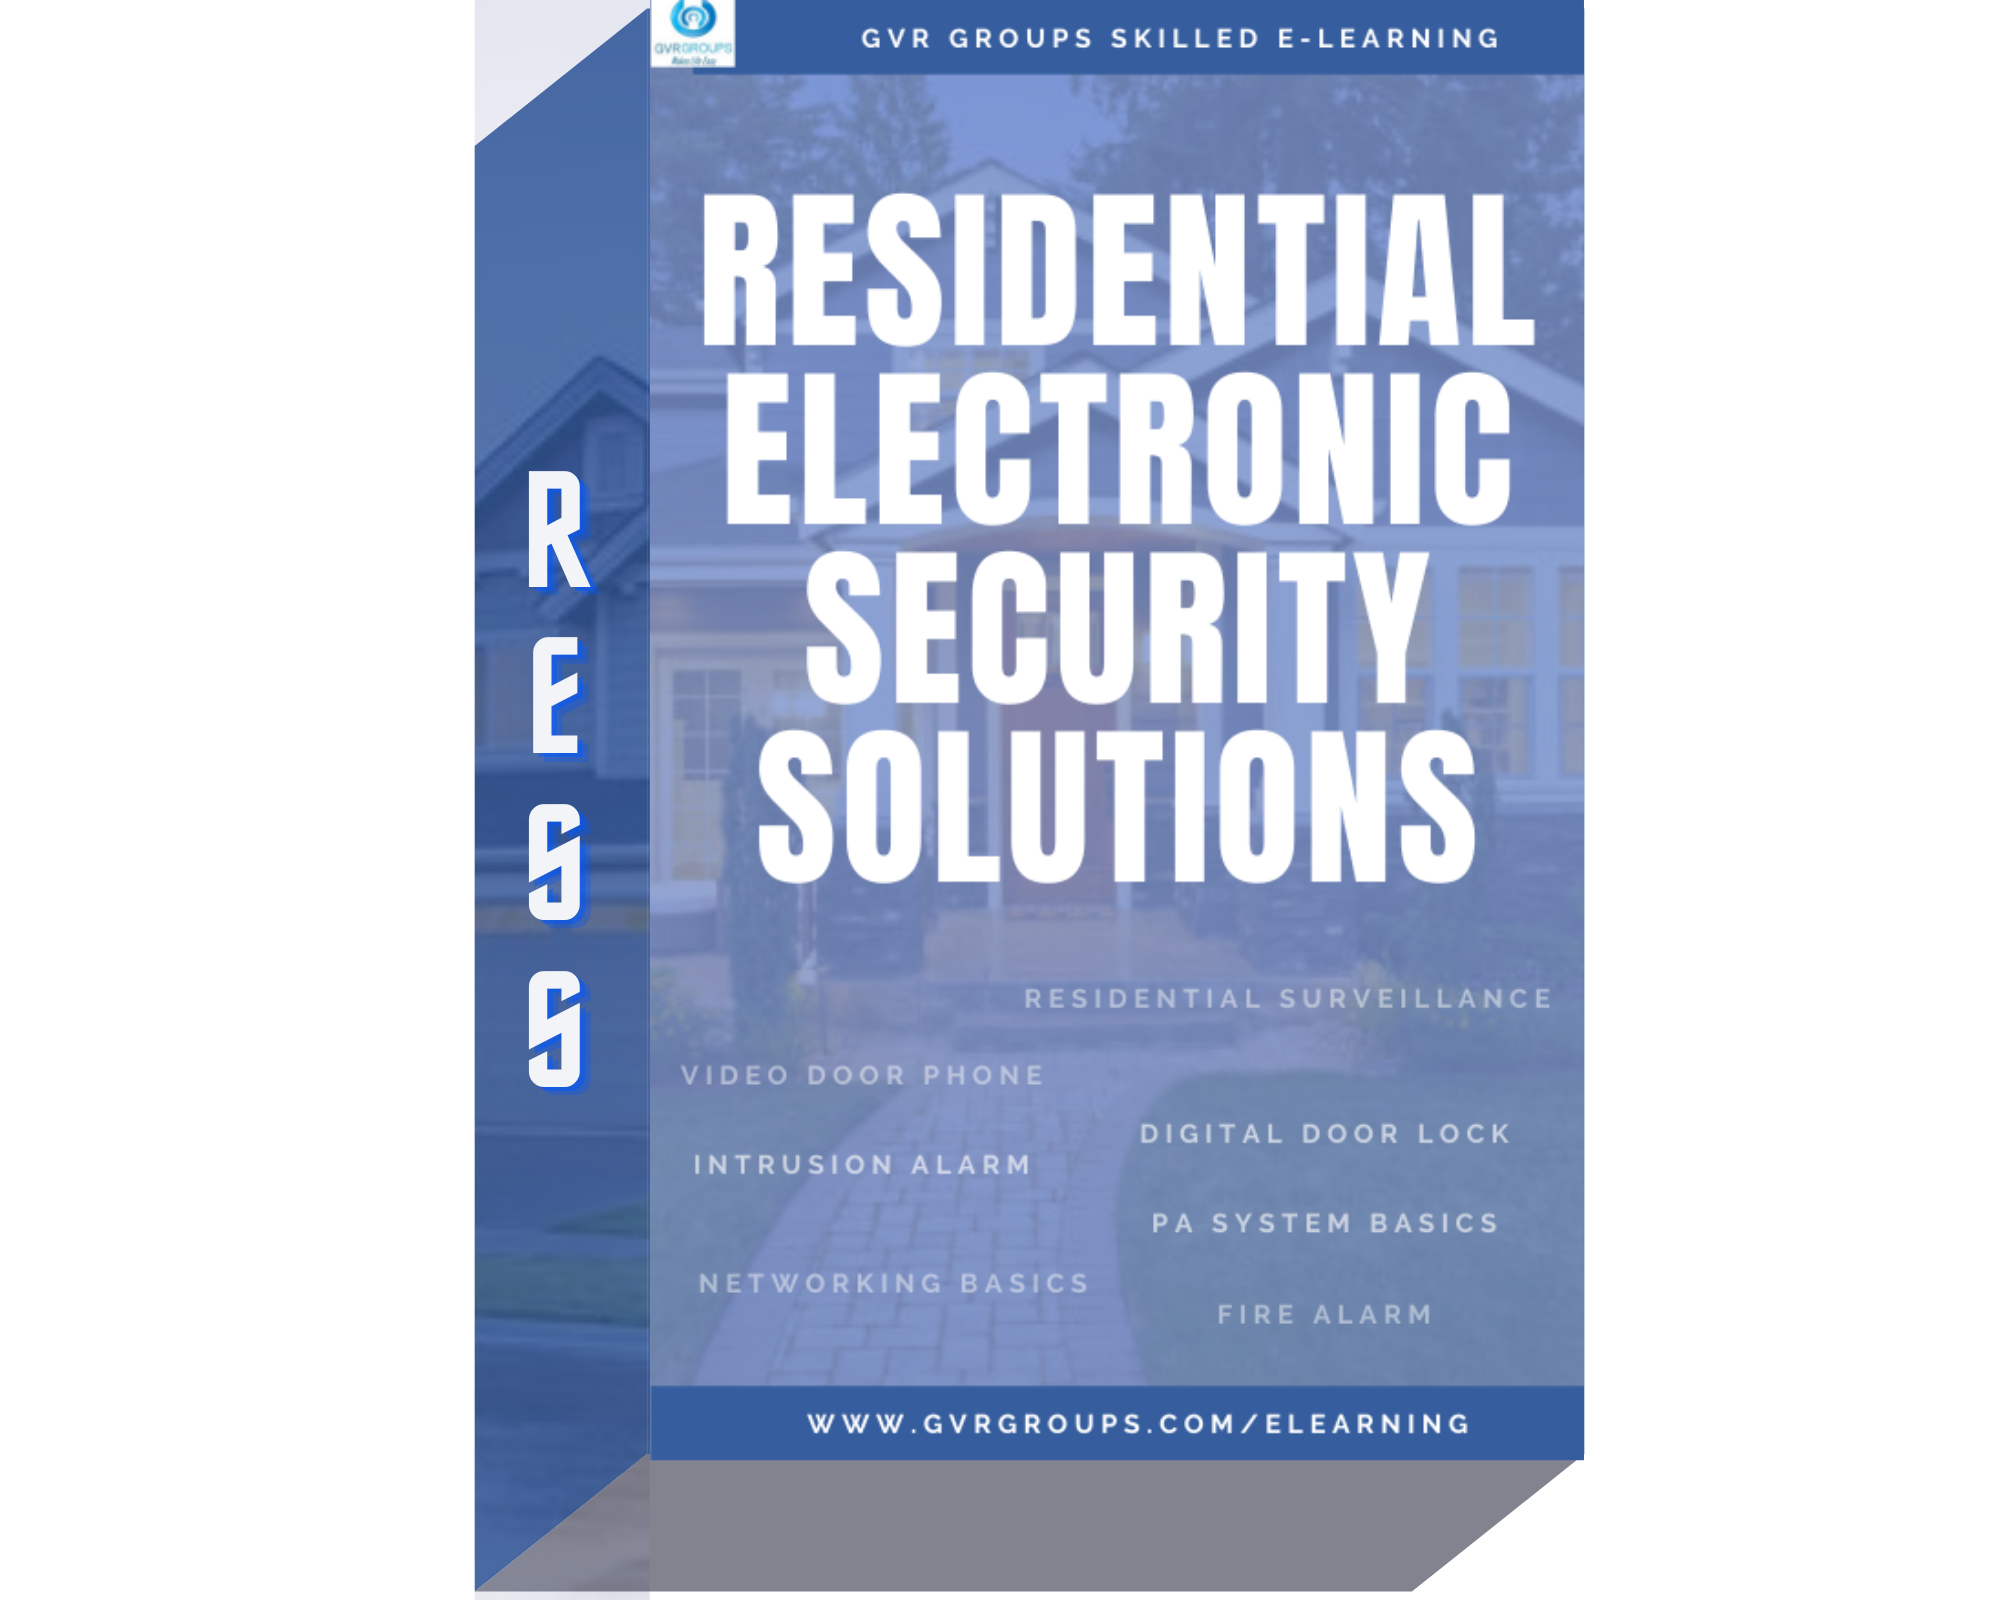 Residential Electronic Security Solutions E-learning Course